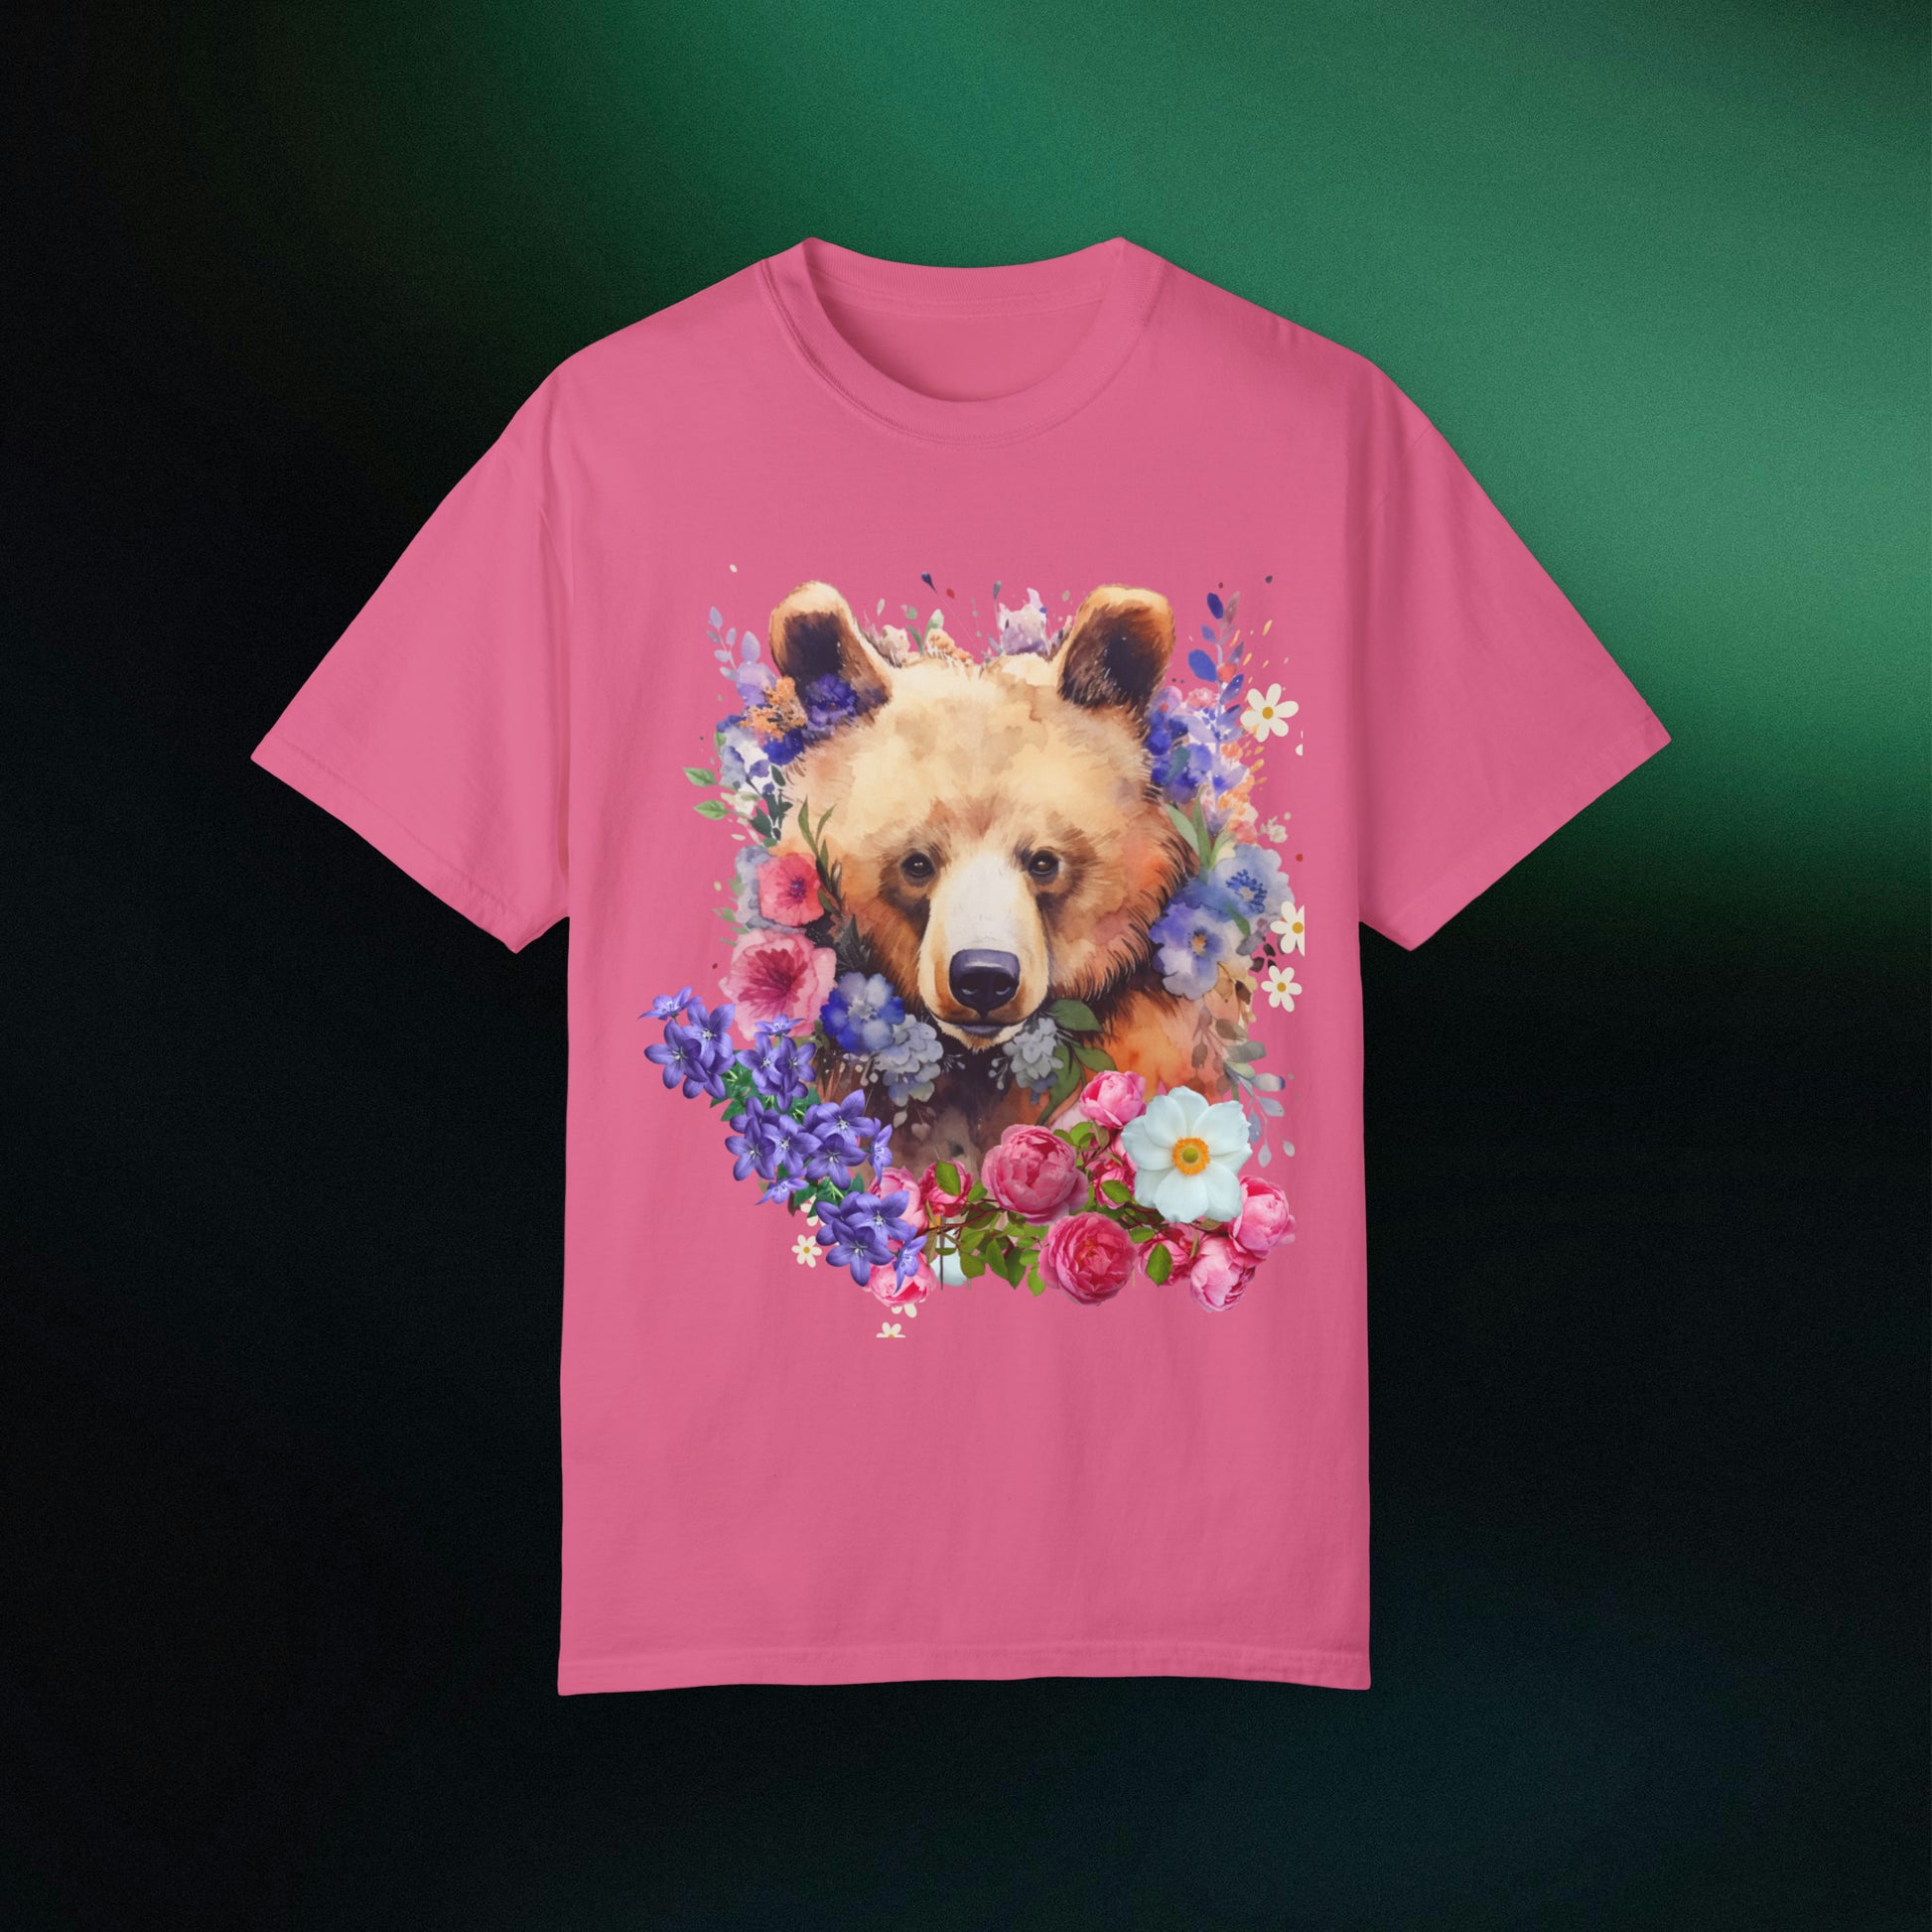 Floral Bear Shirt, Bear Shirt, Floral Bear Tee, Flower Bear Shirt, Animal Lover Tee, Bear Shirt, Bear Lover Gift, Wildlife Animals Tee T-Shirt Heliconia S 